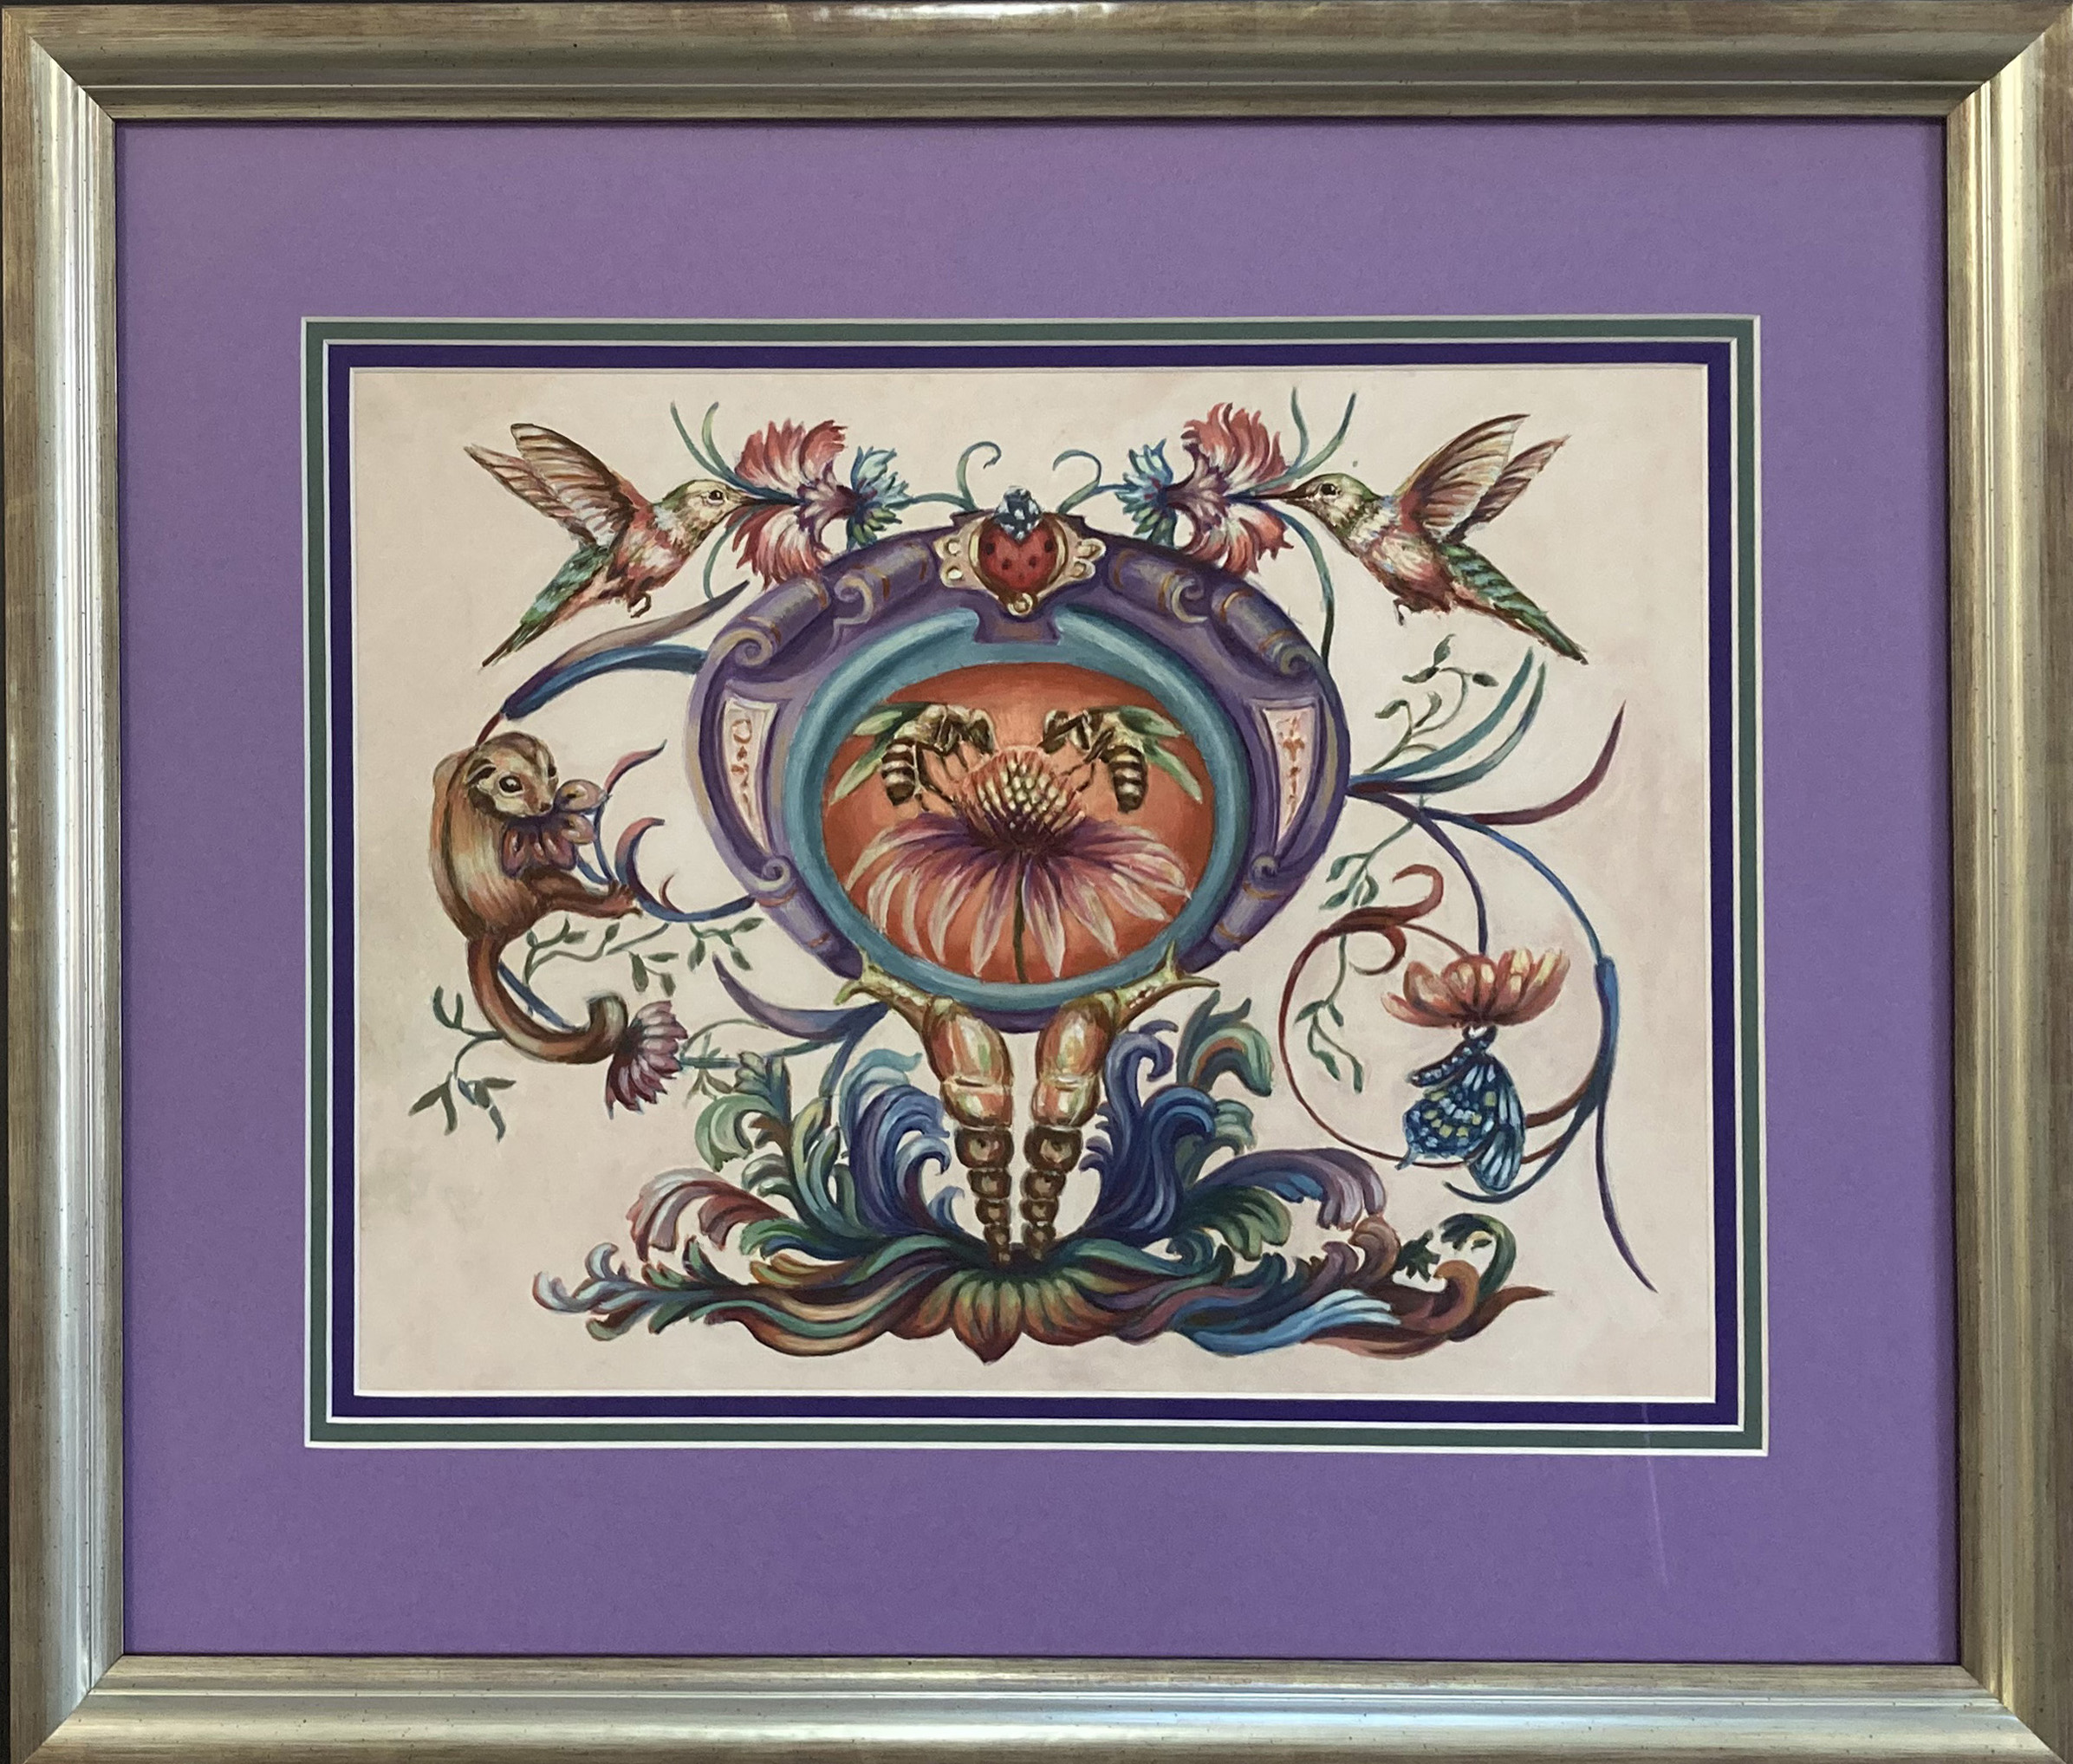 picture of hummingbirds visiting flowers with a silver frame and lavender matting